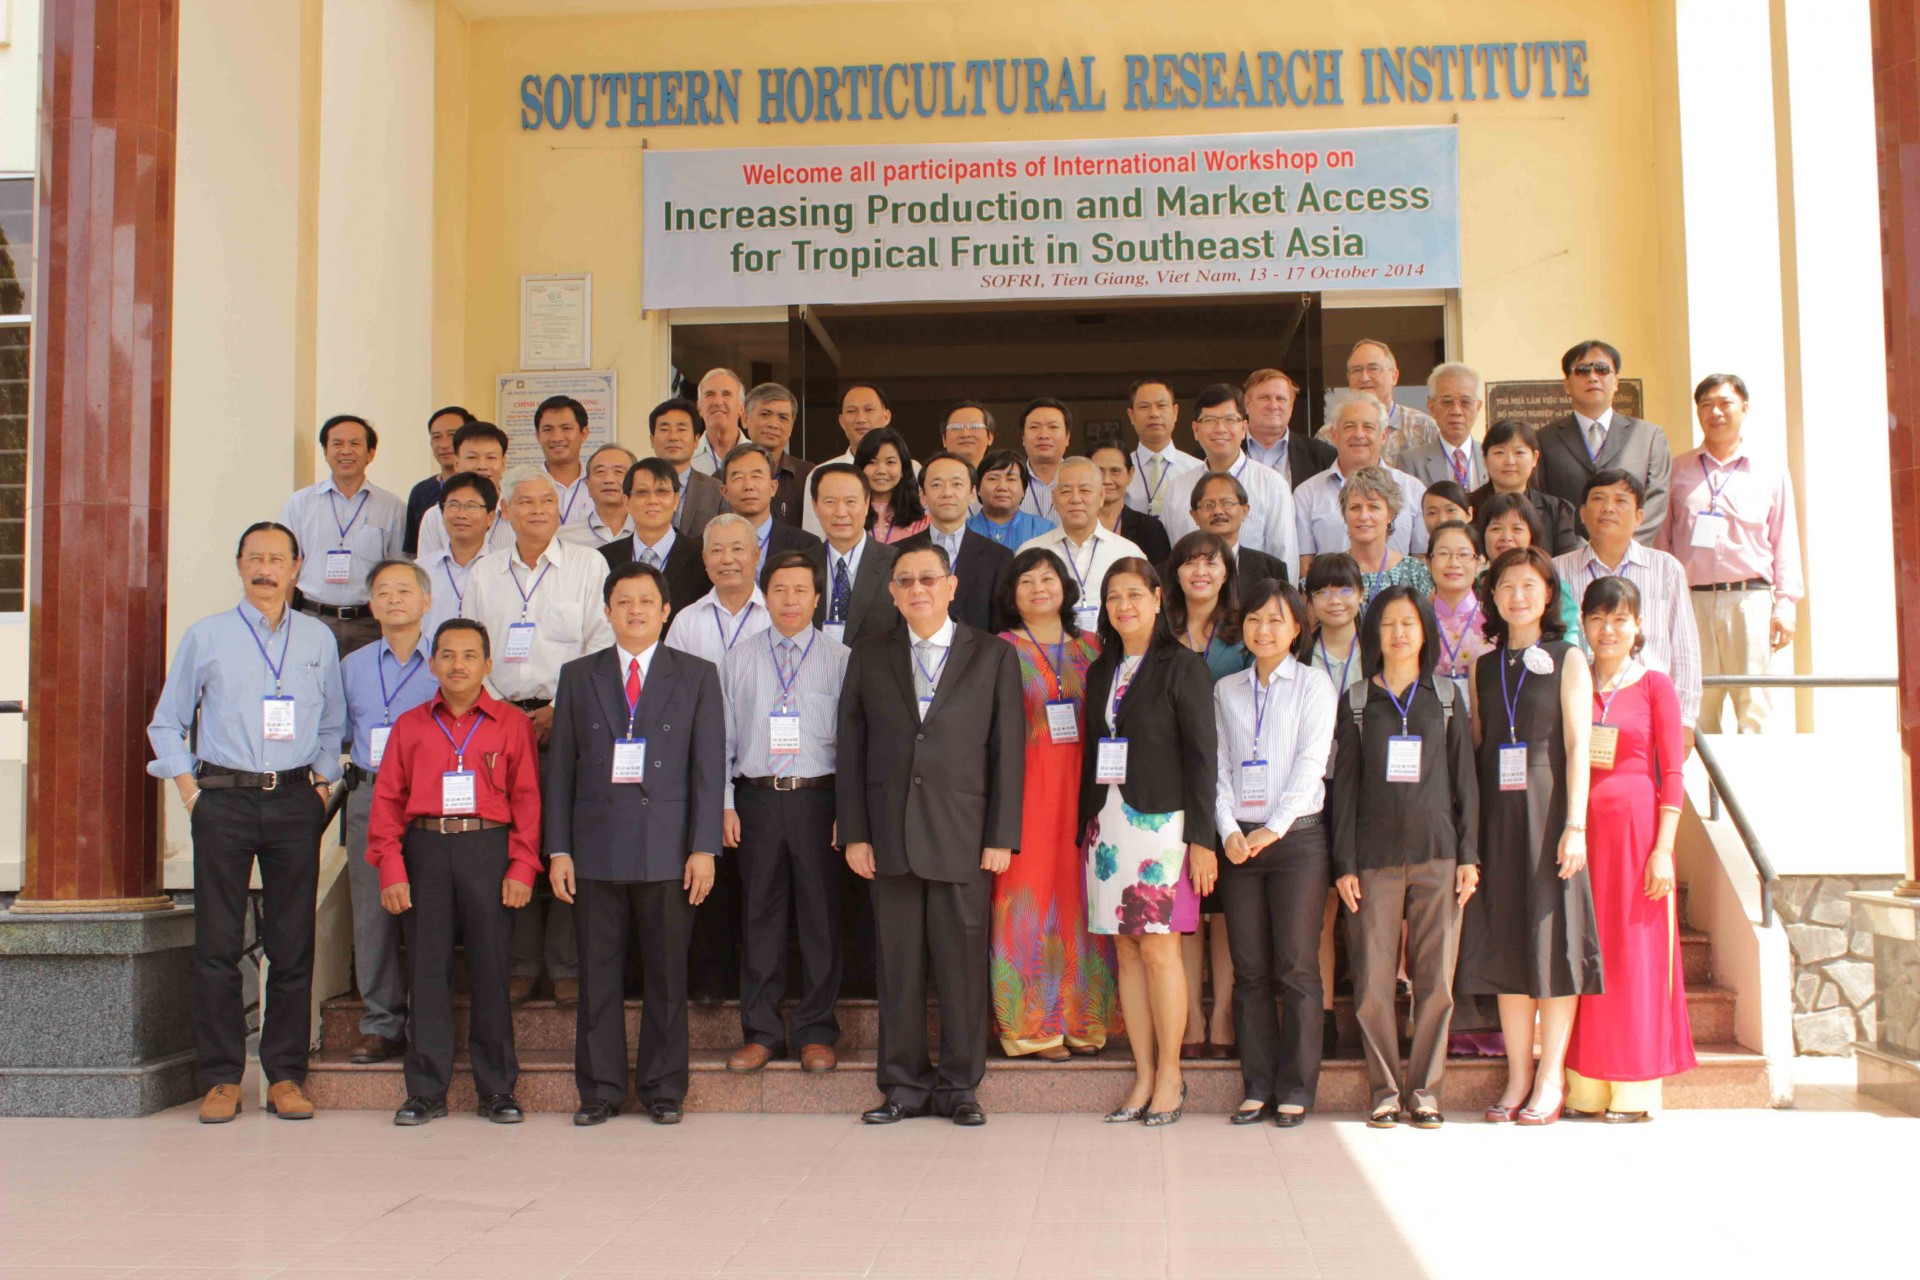 International Workshop on Increasing Production and Market Access for Tropical Fruit in Southeast Asia - SOFRI, 13th – 17th October, 2014